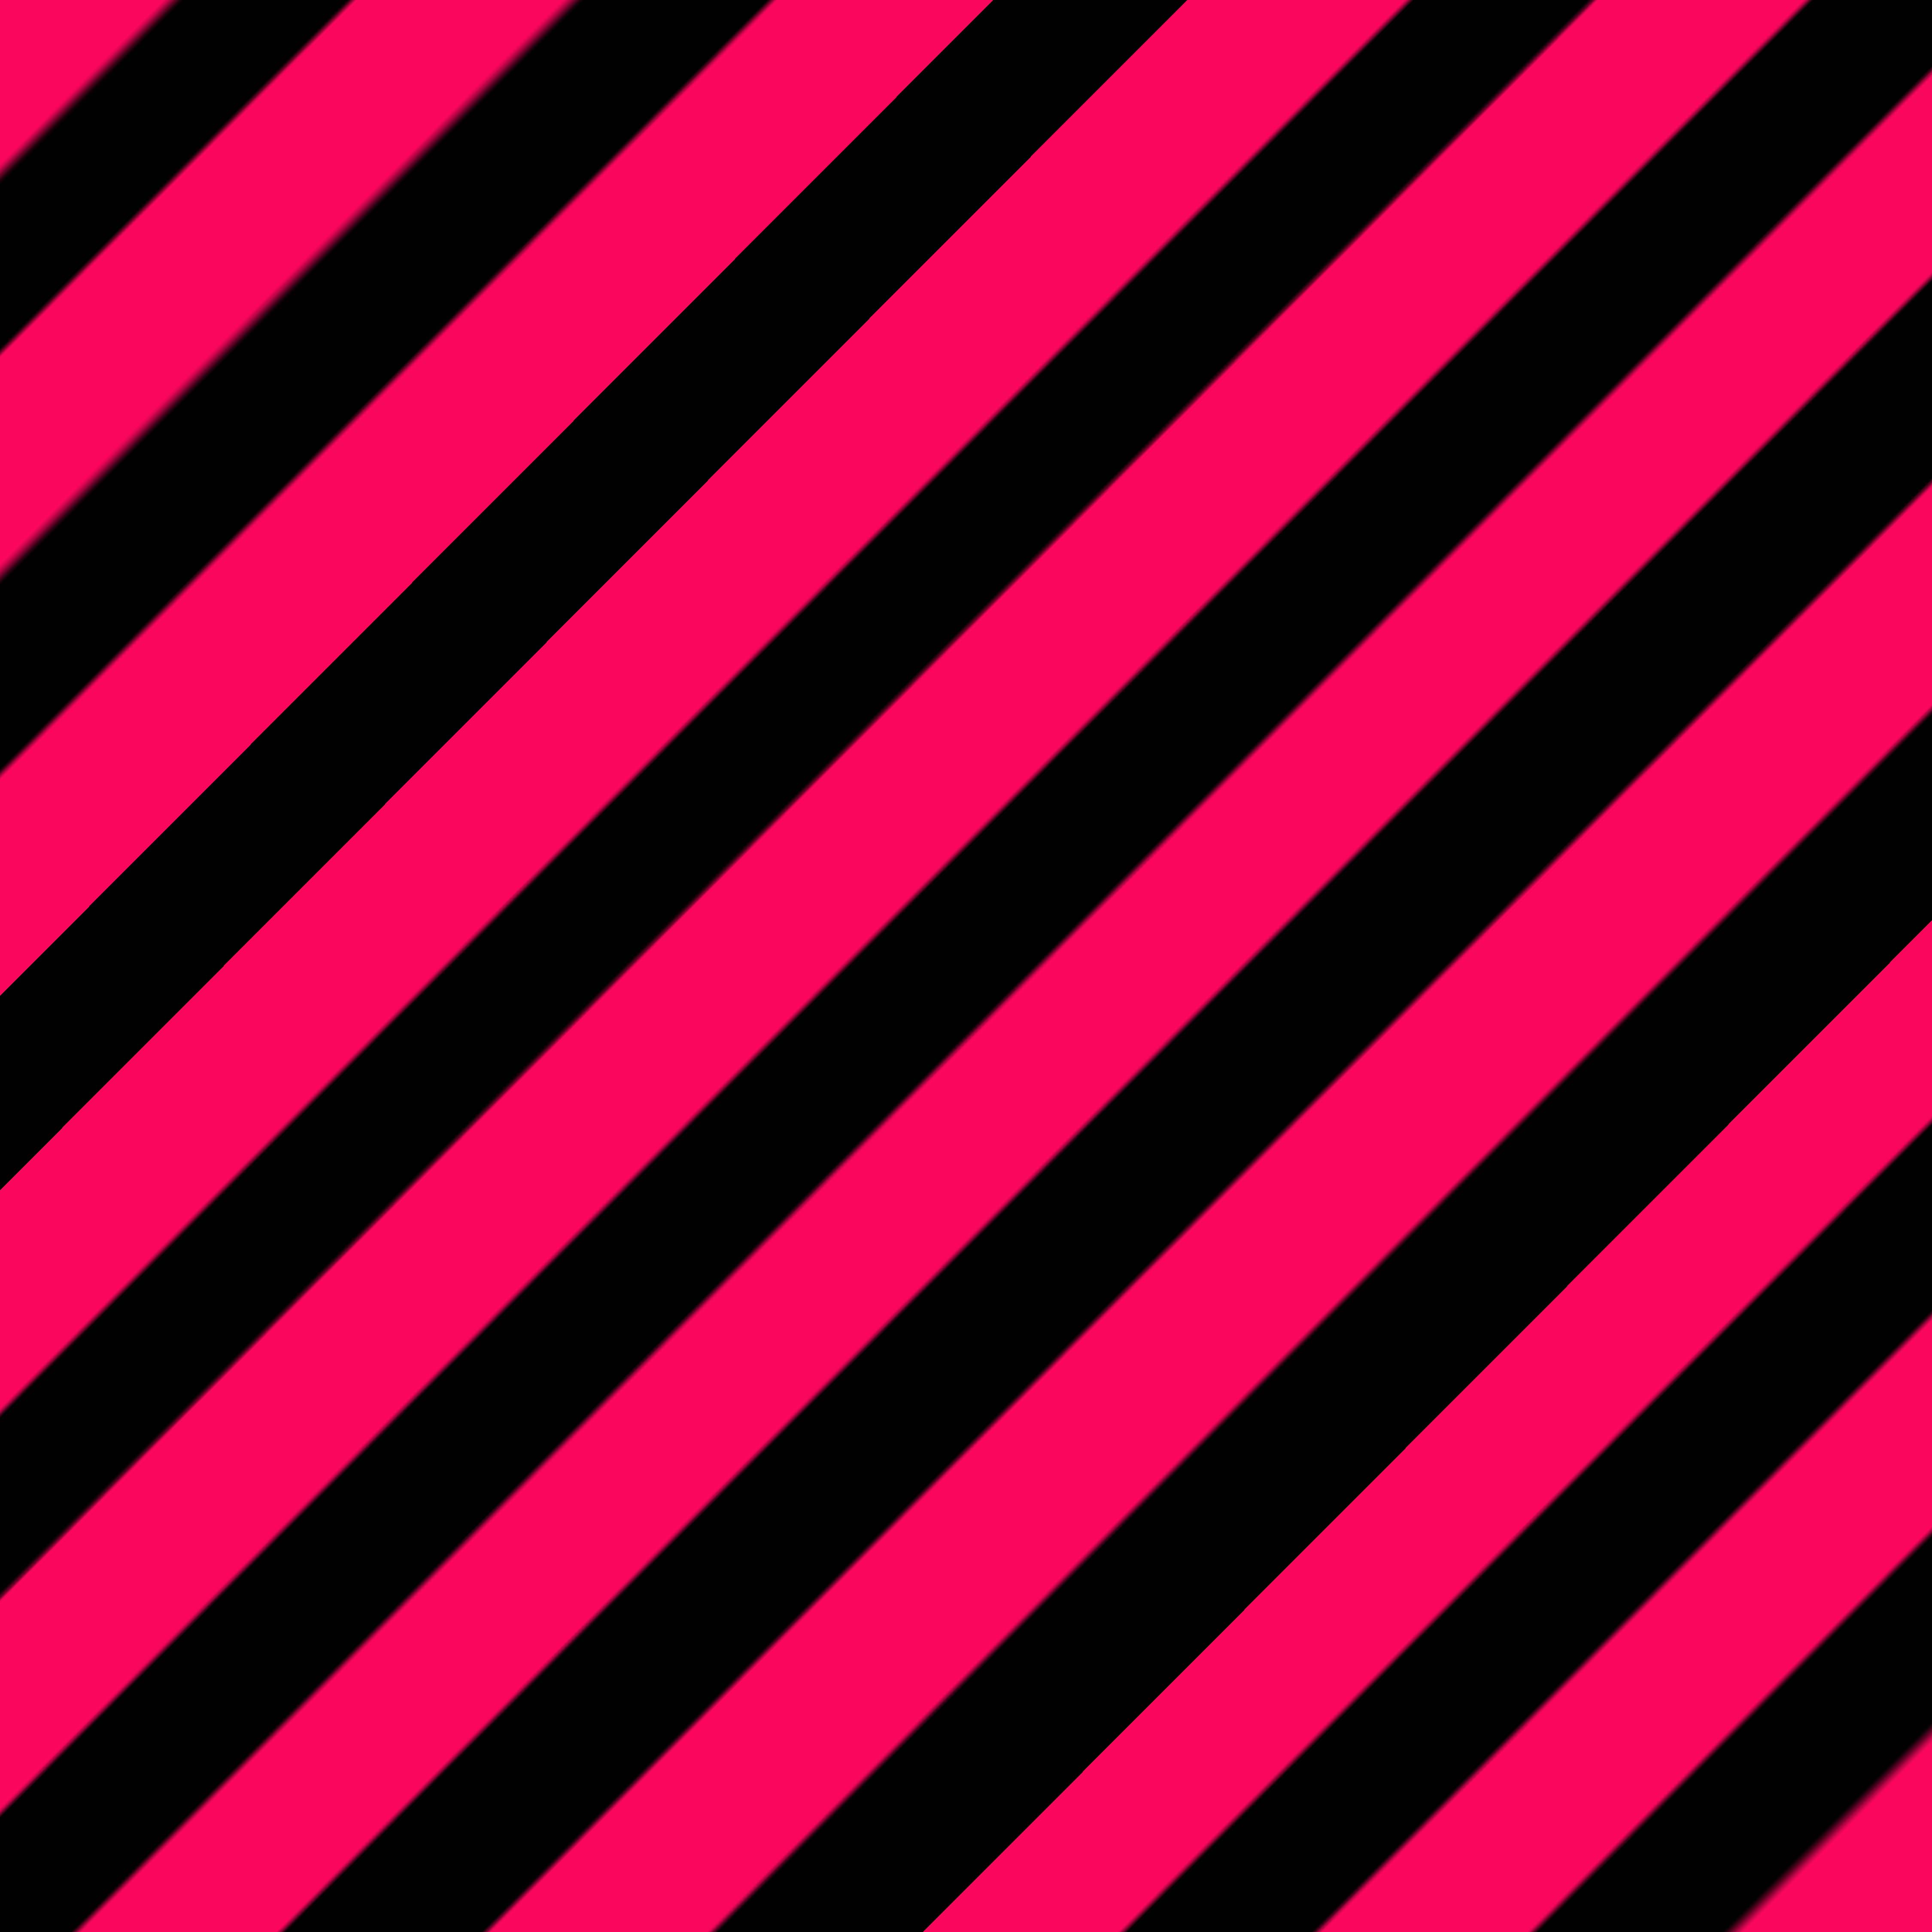 tumblr backgrounds pink and black